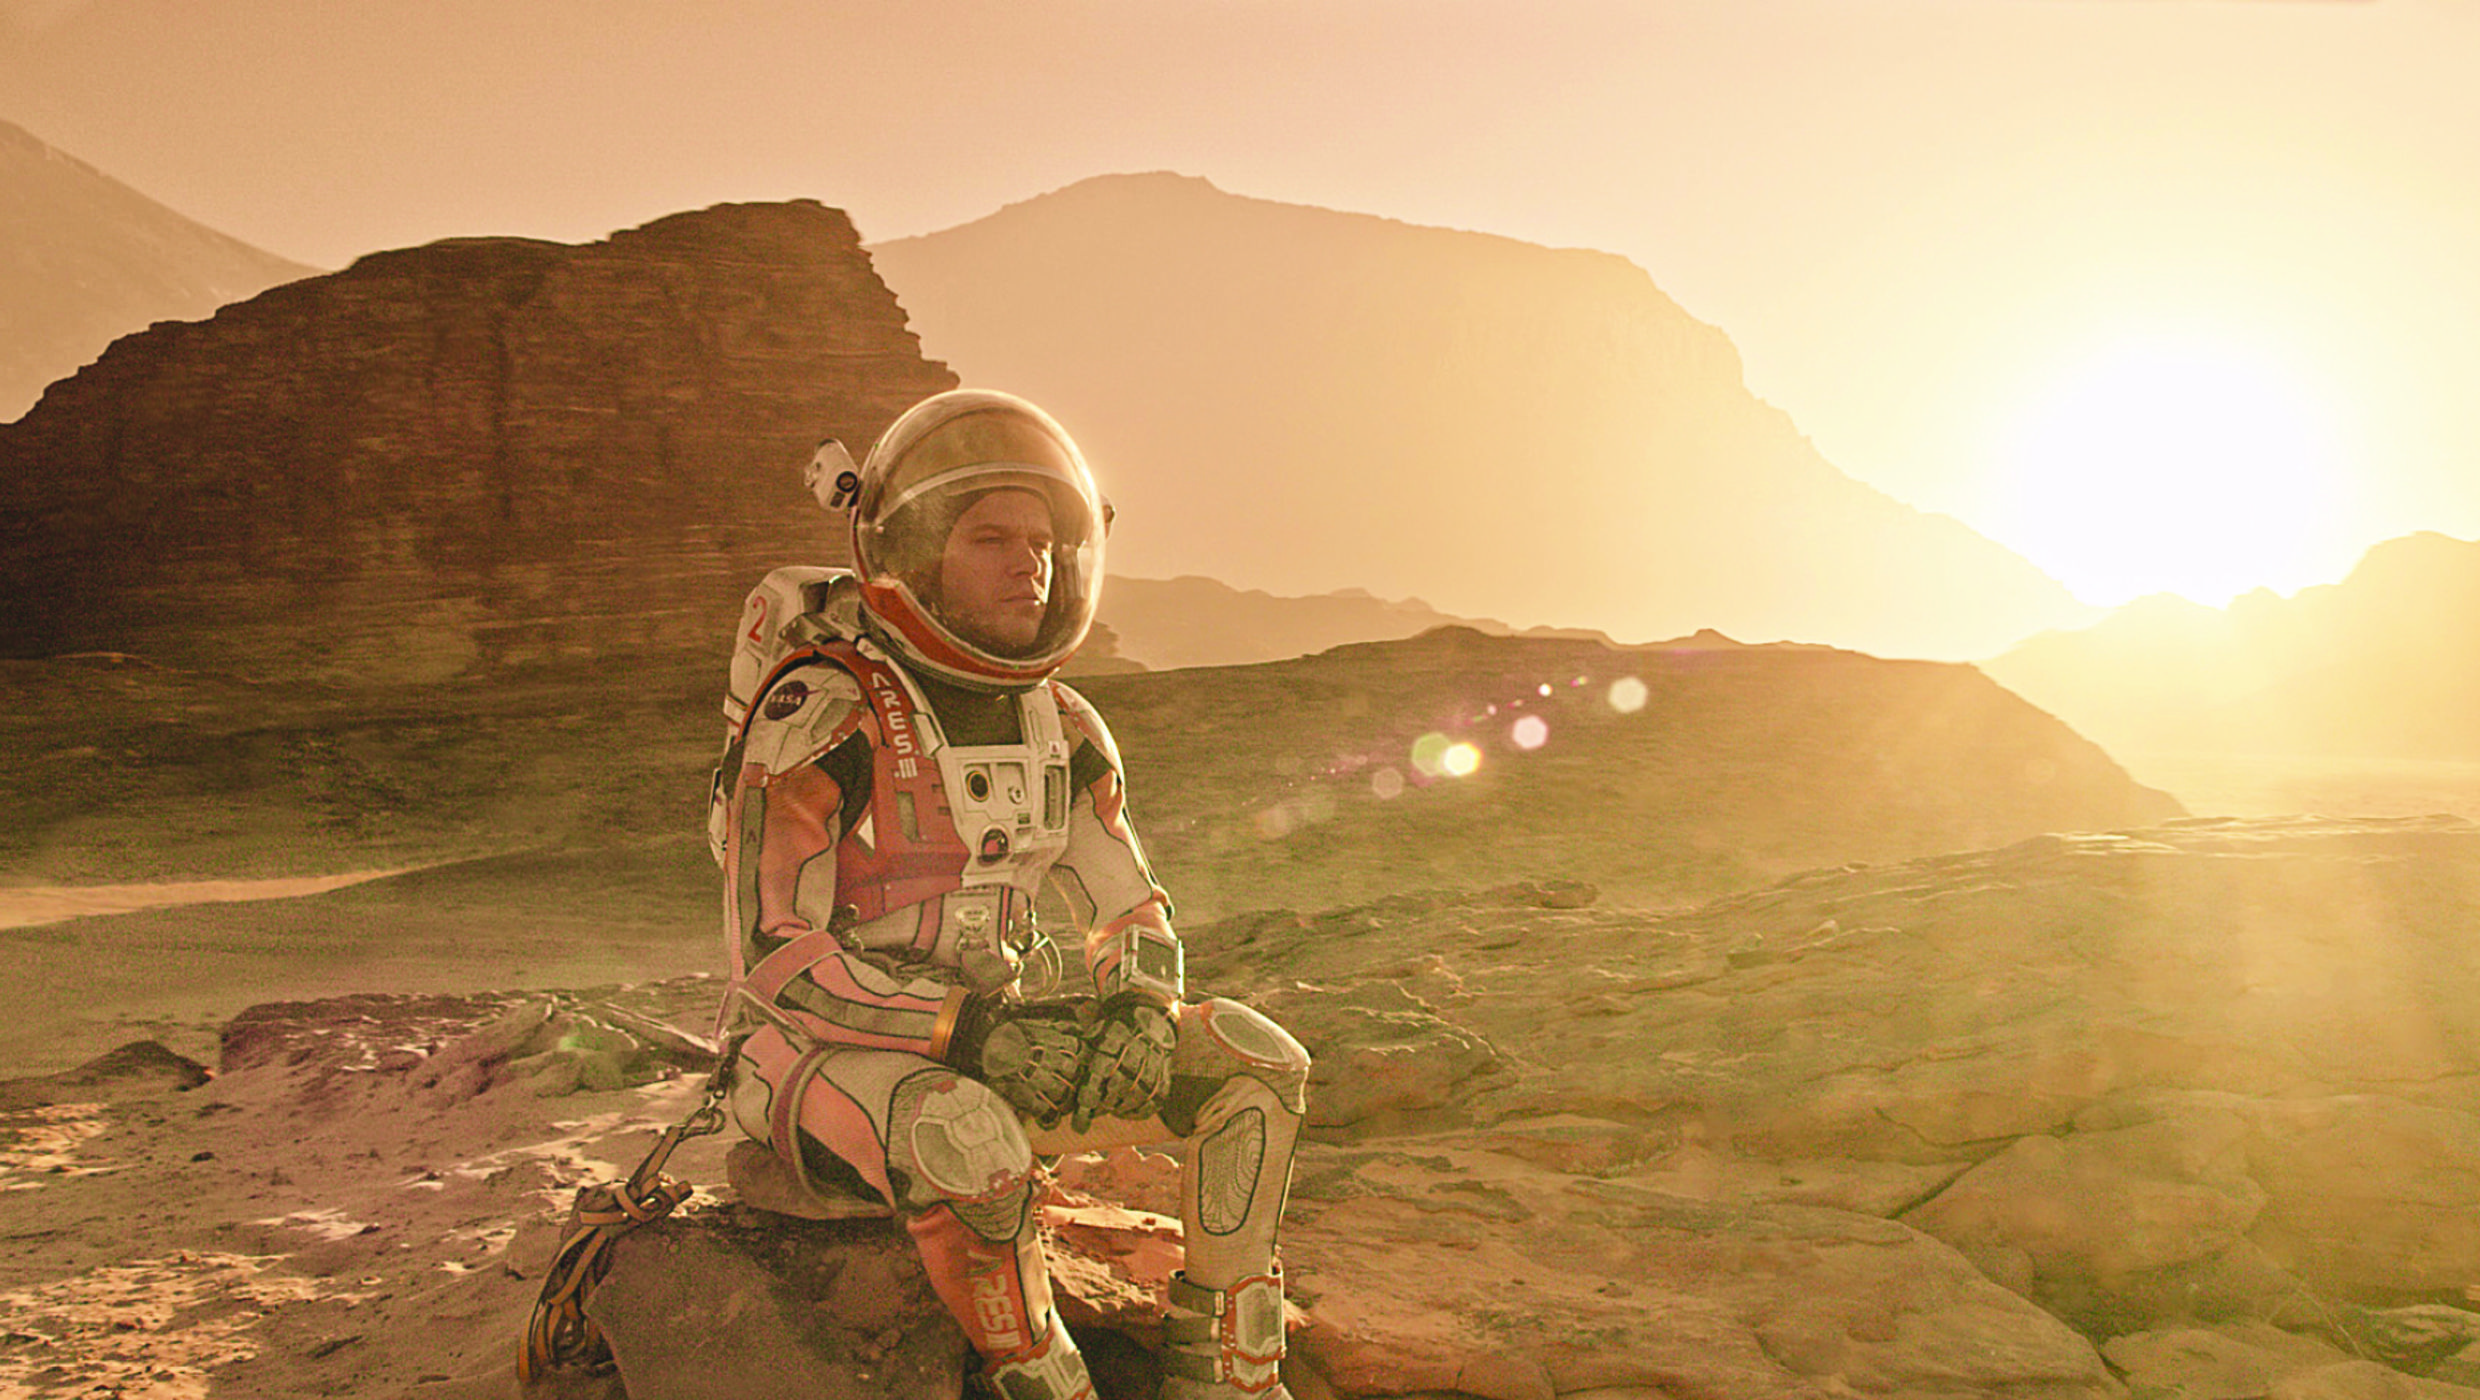 The Martian – Otherworldly Epic